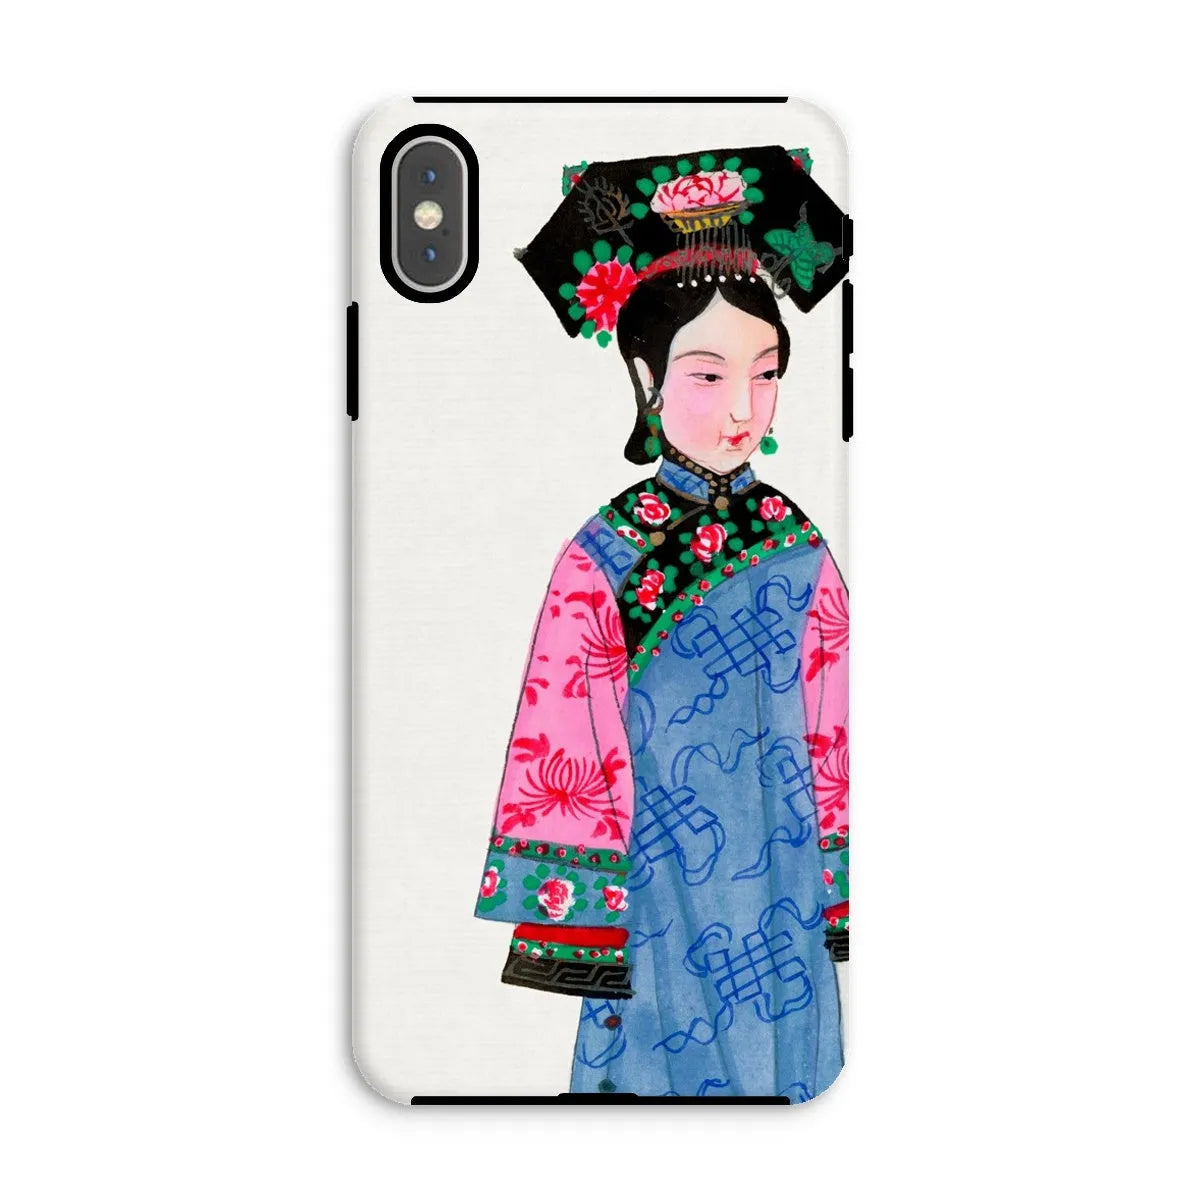 Noblewoman Too - Manchu Aesthetic Art Phone Case - Iphone Xs Max / Matte - Mobile Phone Cases - Aesthetic Art